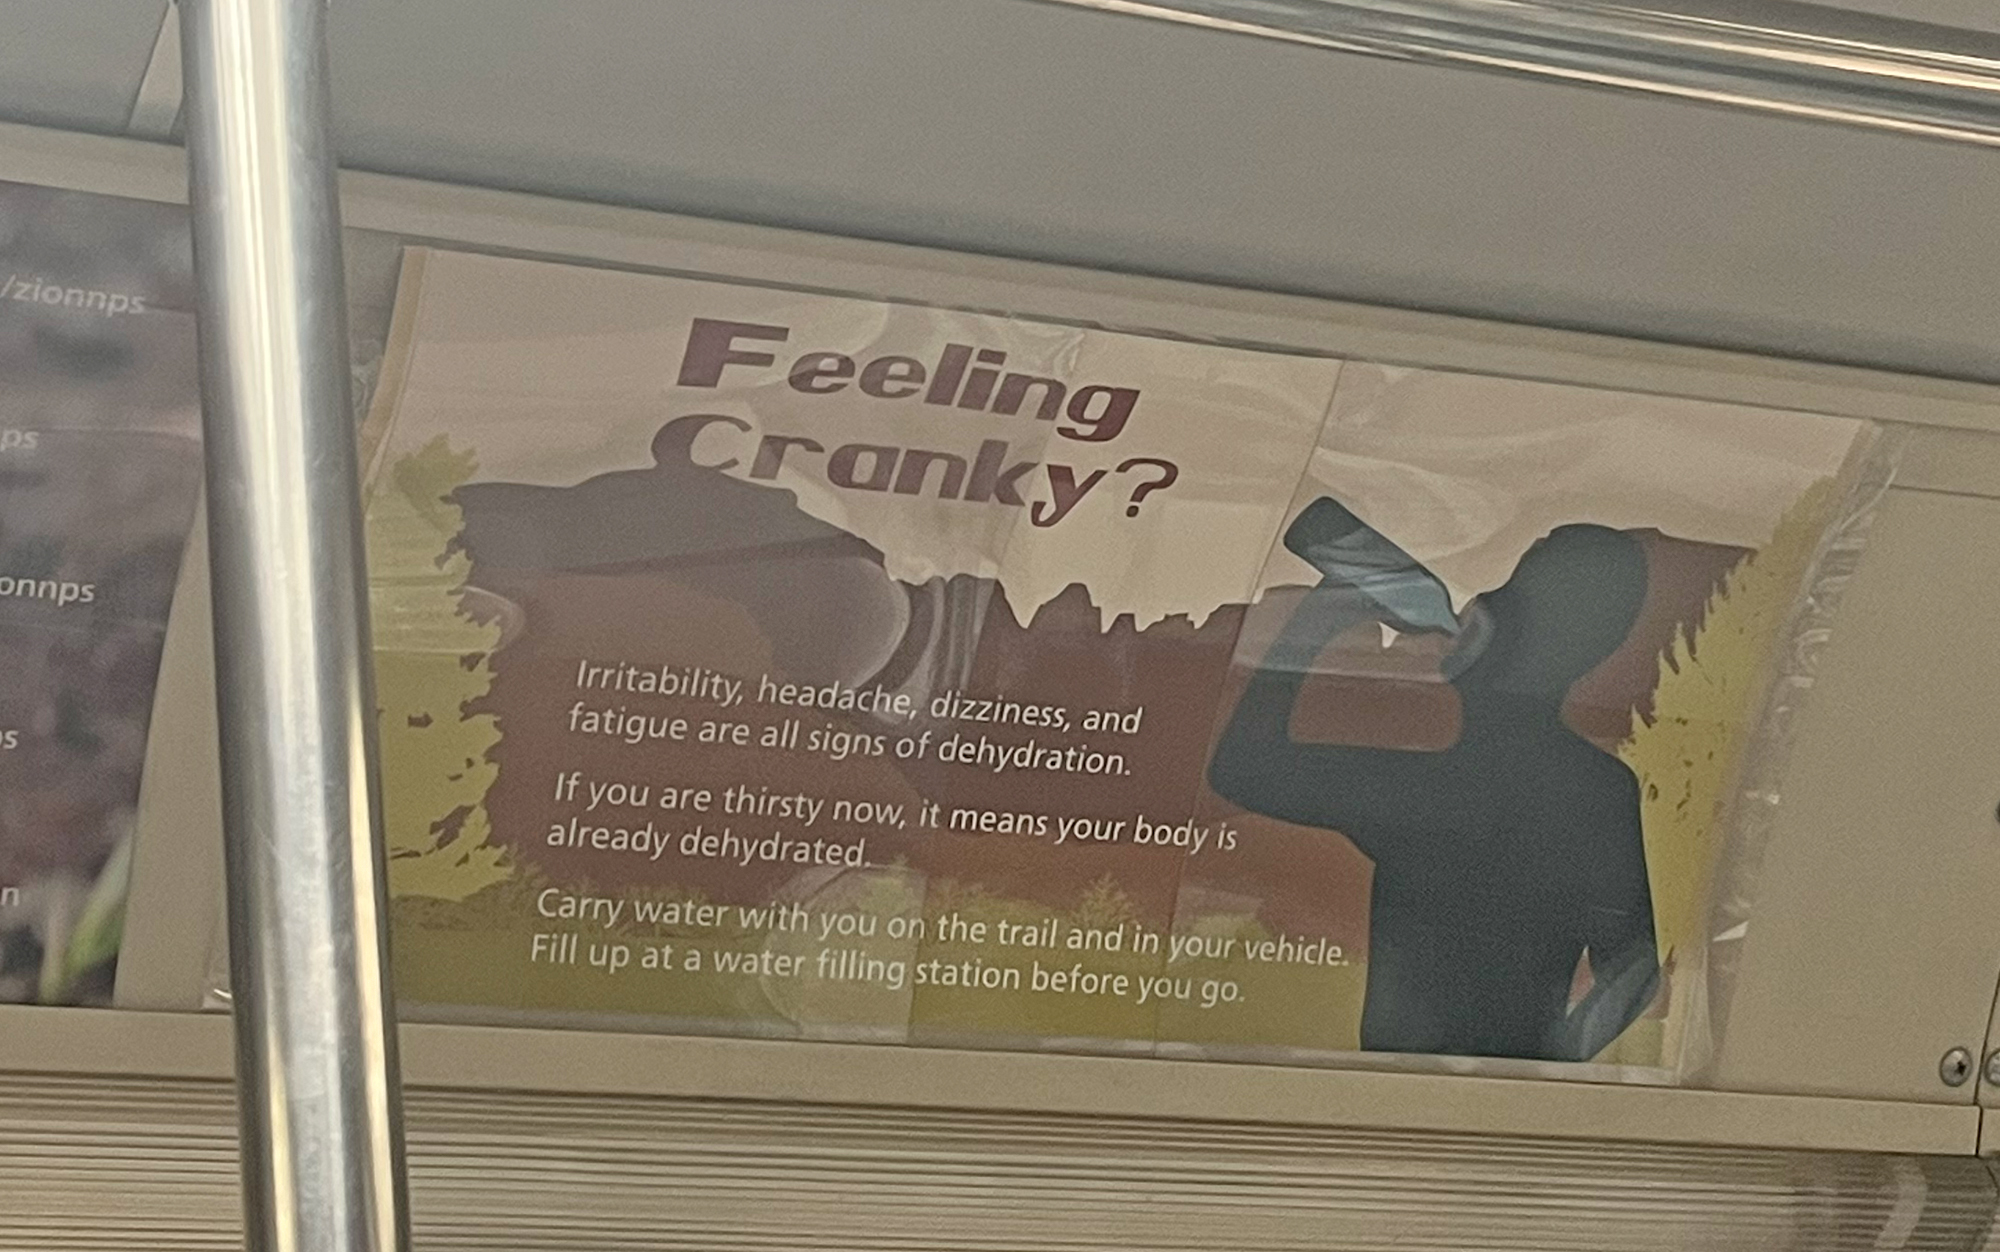 This PSA about dehydration is posted in the Zion National Park shuttle buses that run through the park all summer.